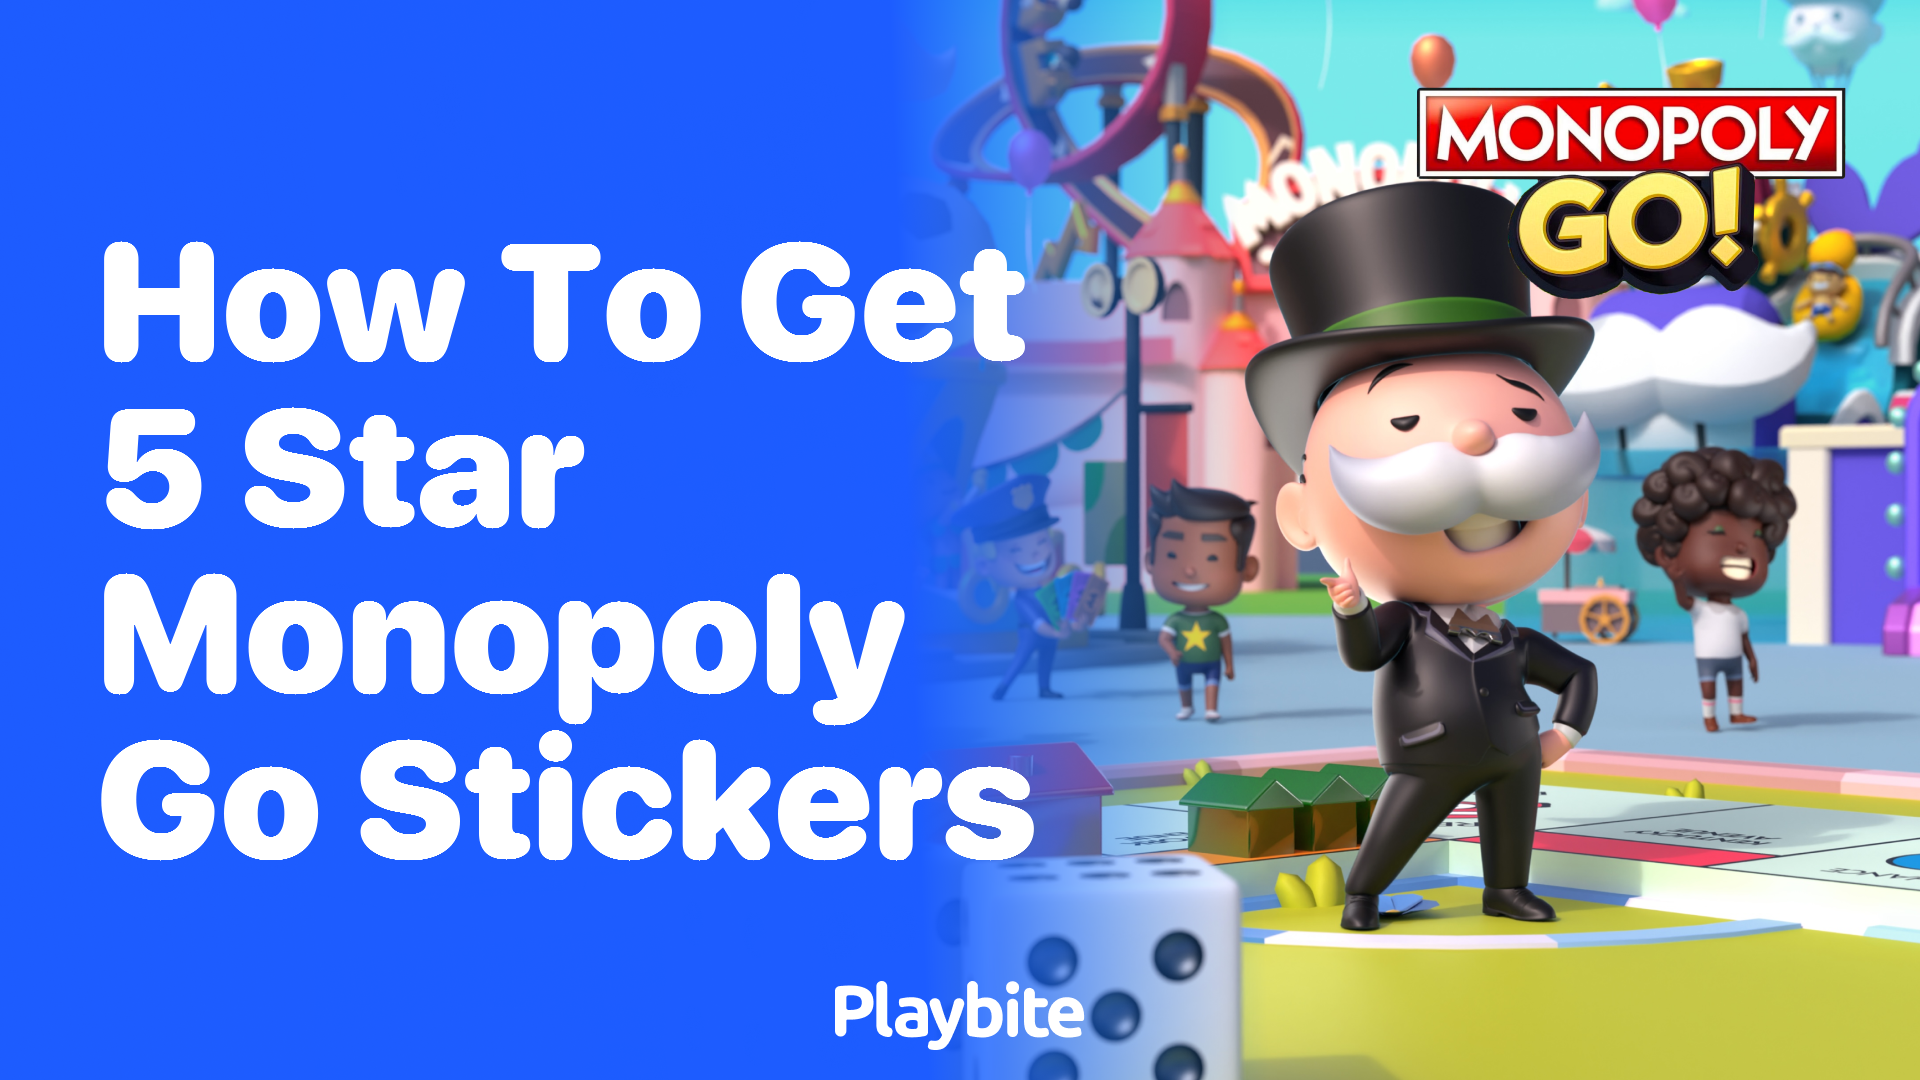 How to Get 5-Star Monopoly Go Stickers